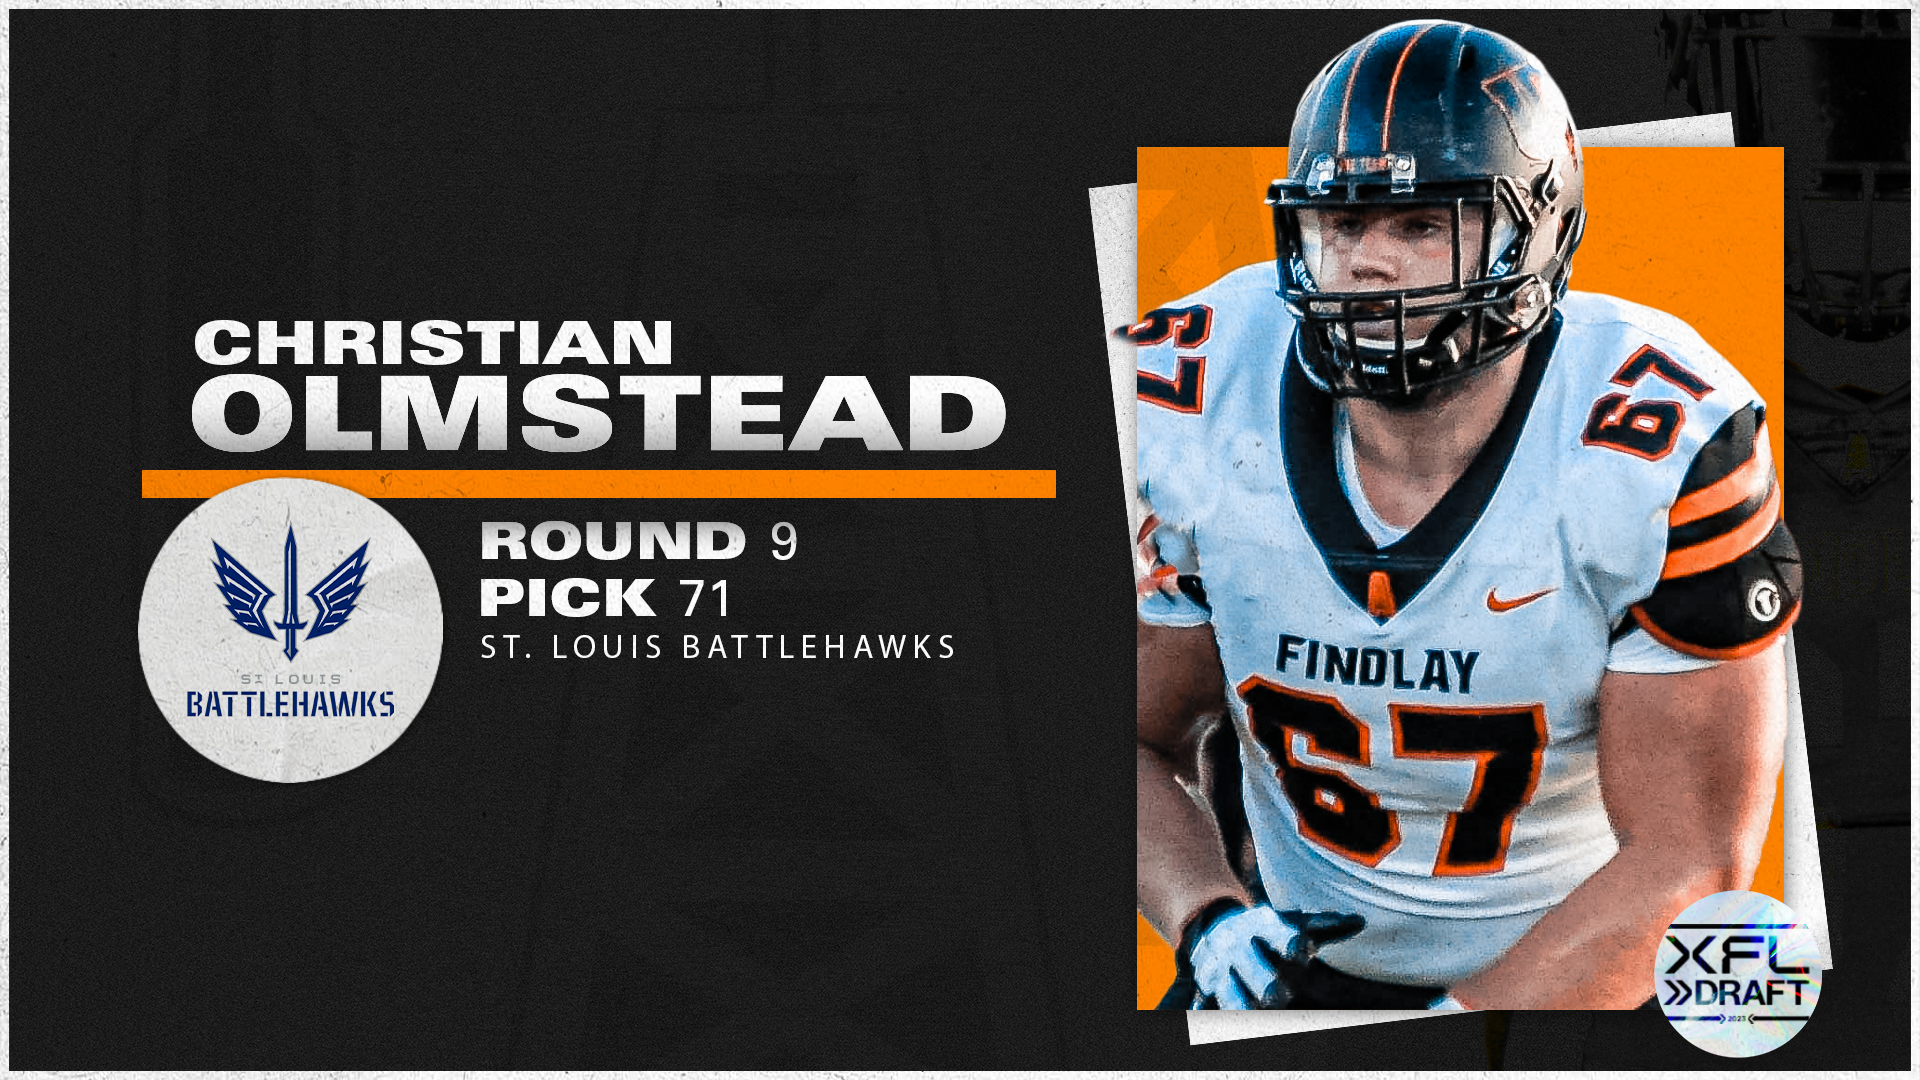 Olmstead Drafted by St. Louis Battlehawks of the XFL